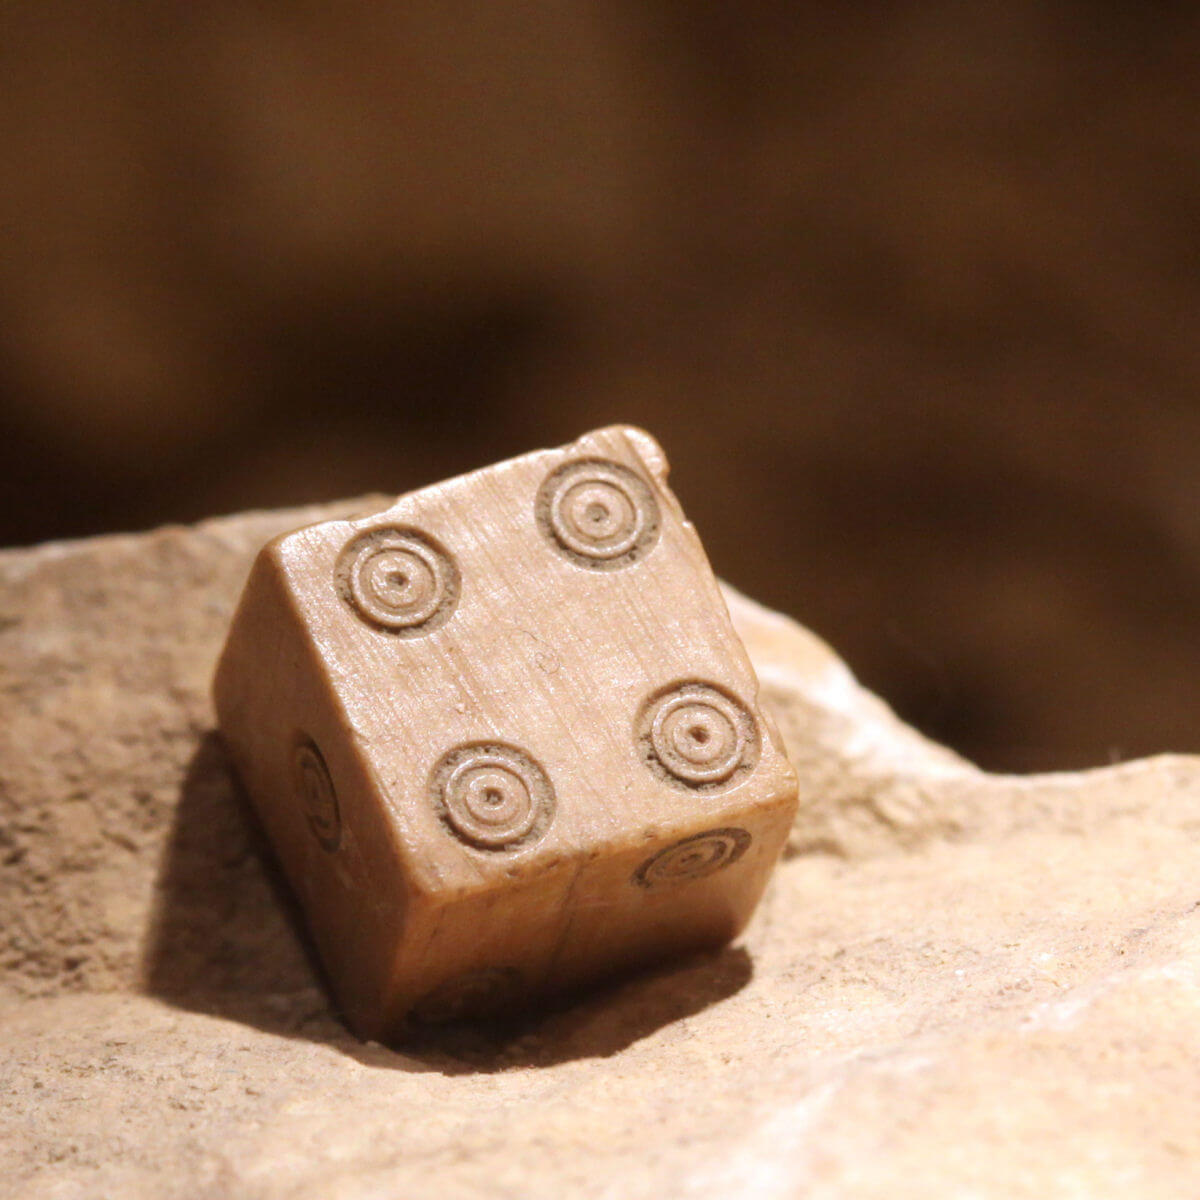 An ancient Roman dice on display at The Roman Museum in Lausanne-Vidy, Switzerland